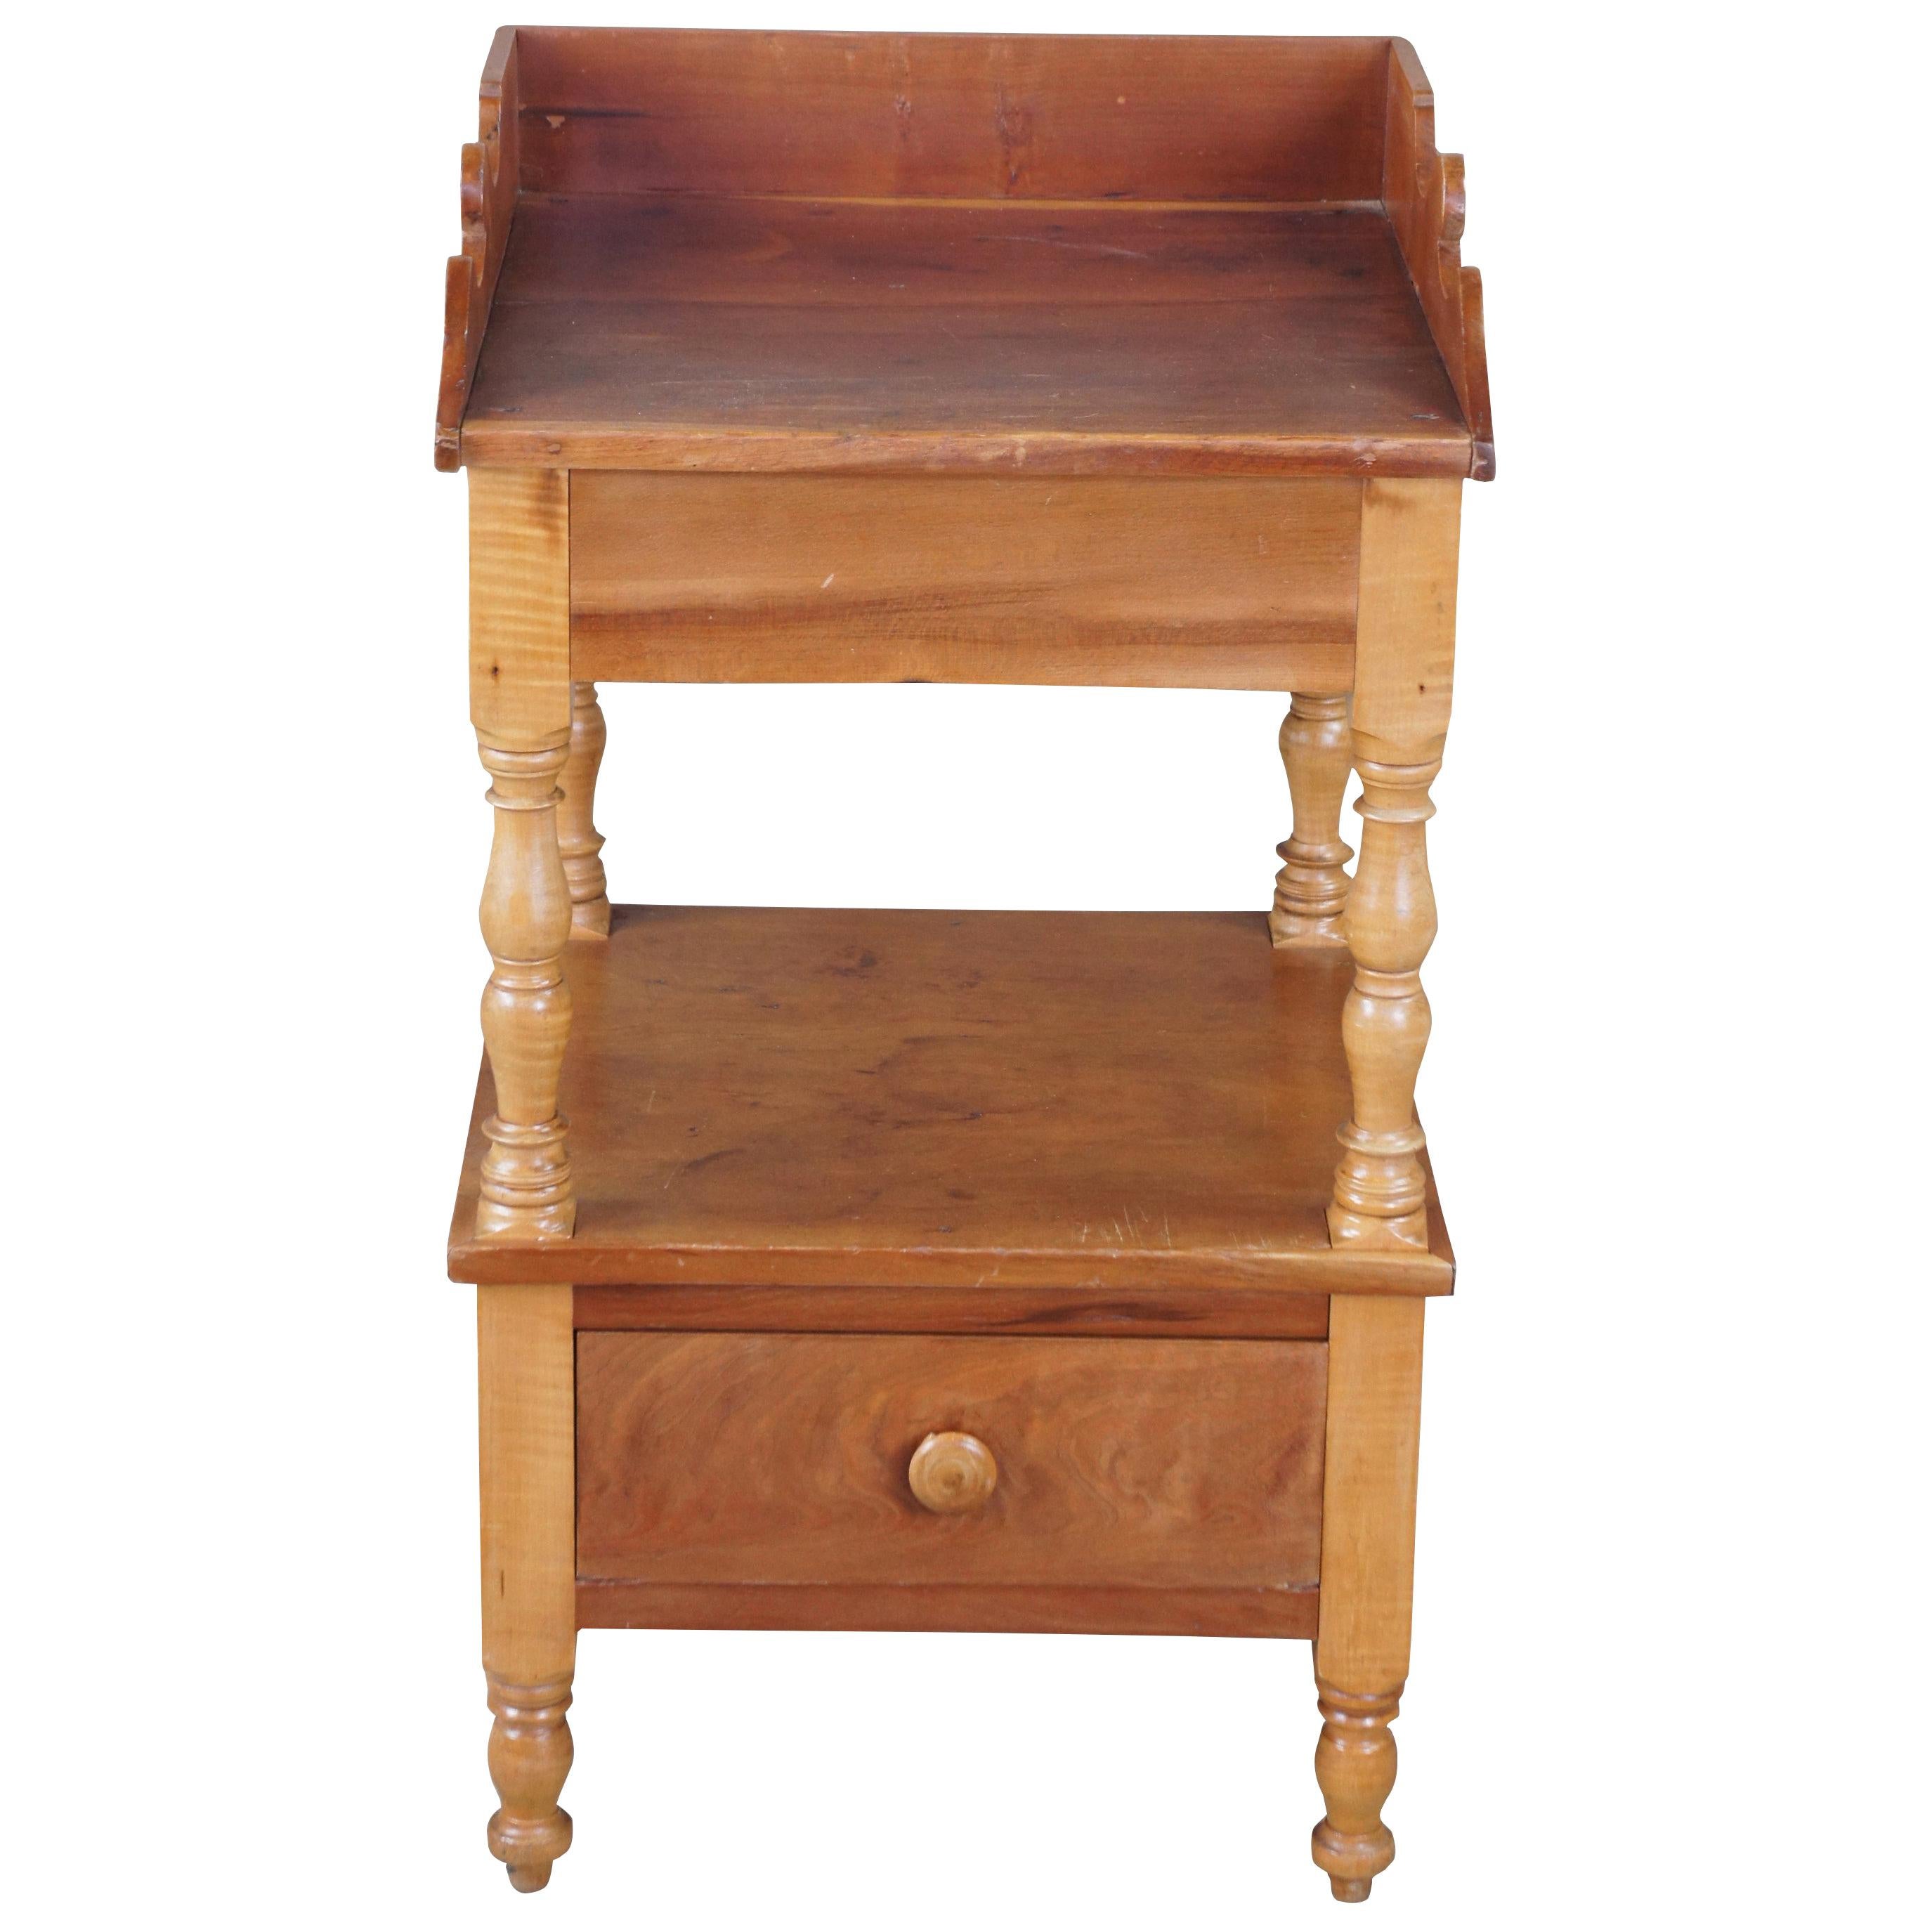 Early American Maple & Cherry Two Tier Side Accent Table Dry Sink Washstand